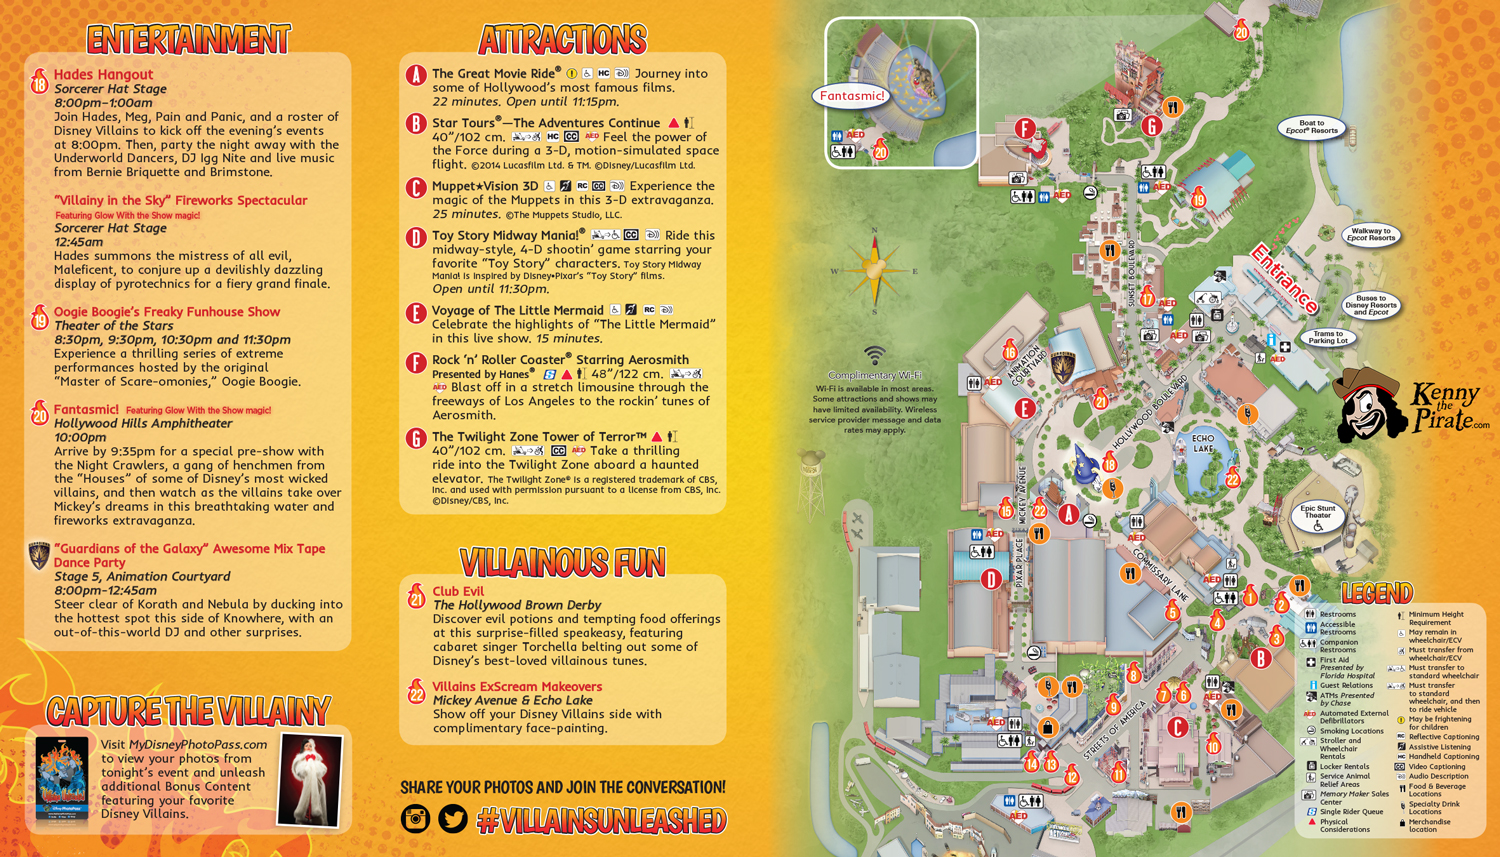 Villains Unleashed Map Hollywood Studios